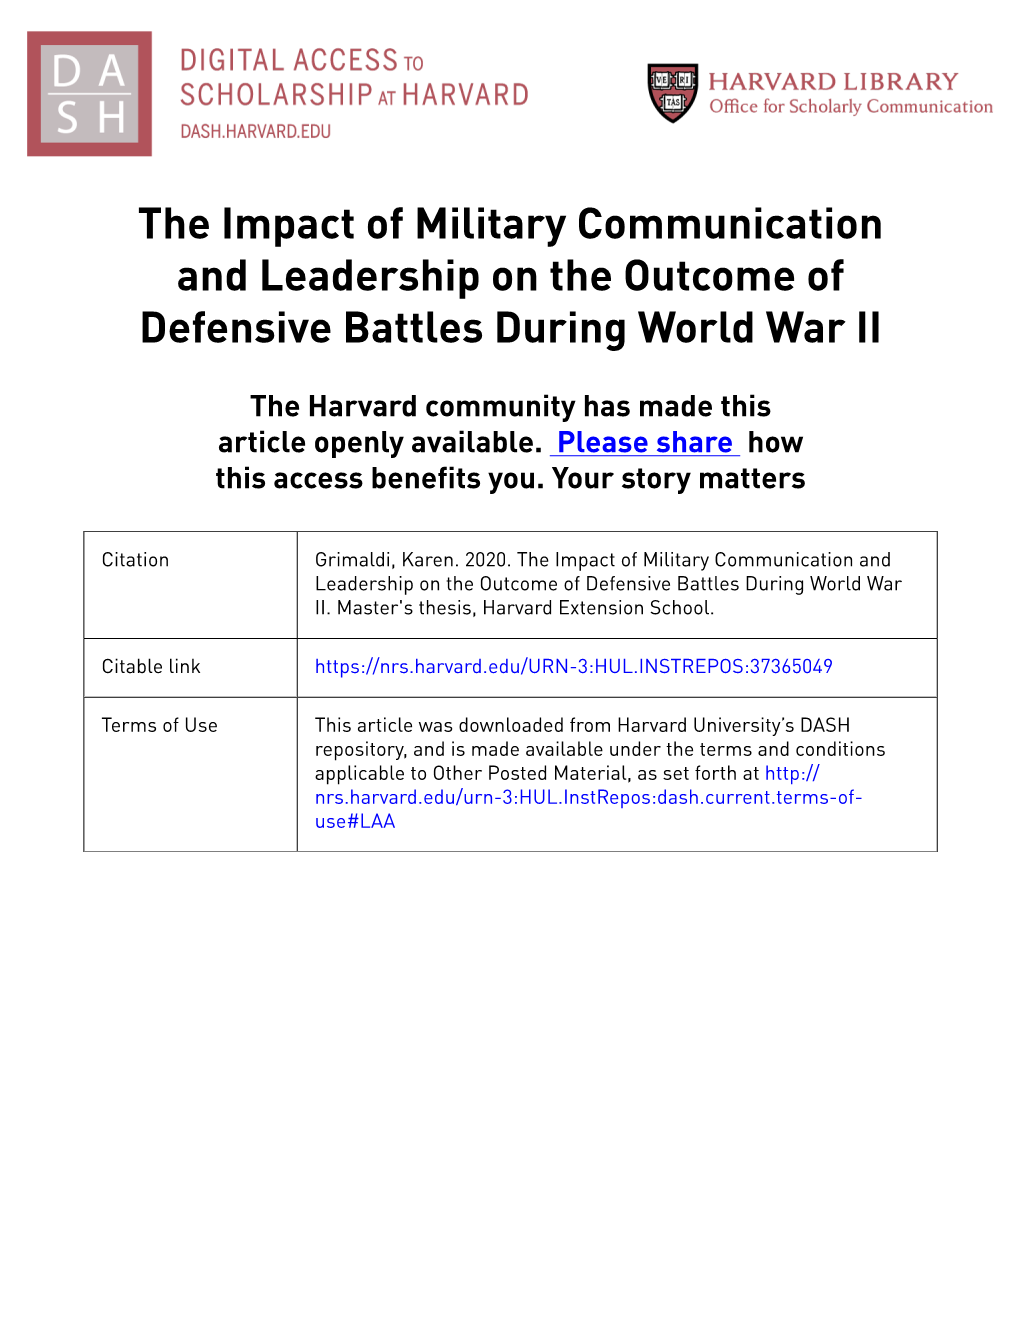 The Impact of Military Communication and Leadership on the Outcome of Defensive Battles During World War II